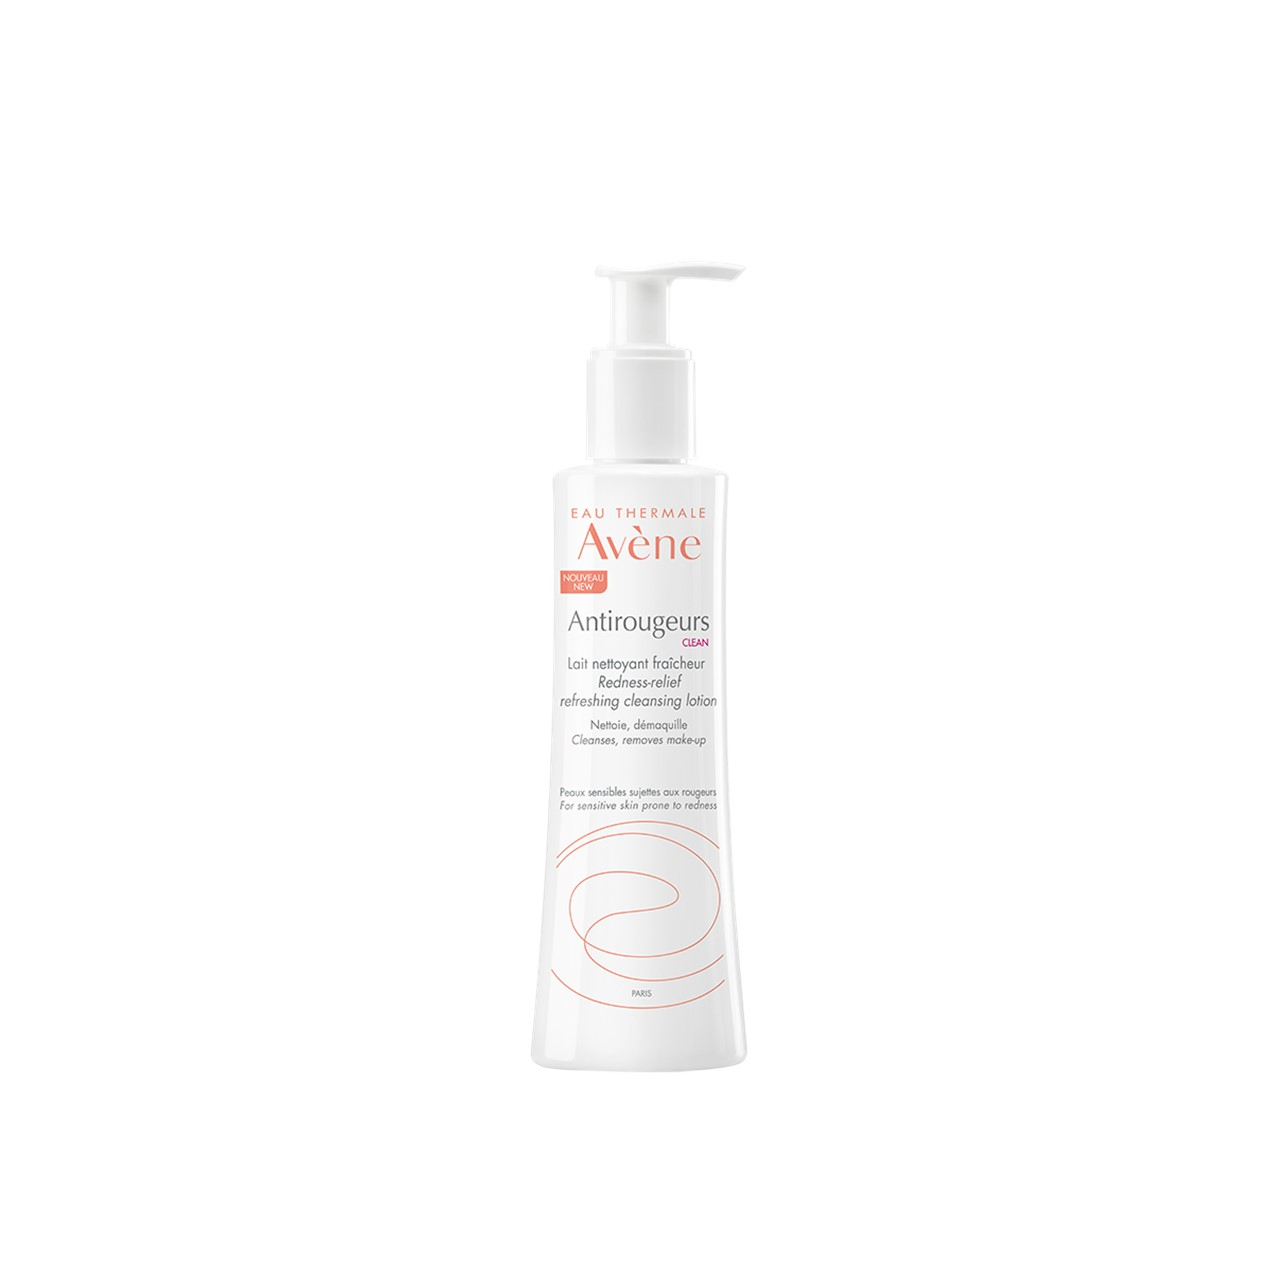 Avène Antirougeurs Clean Redness-Relief Cleansing Lotion 200ml (6.76fl oz)